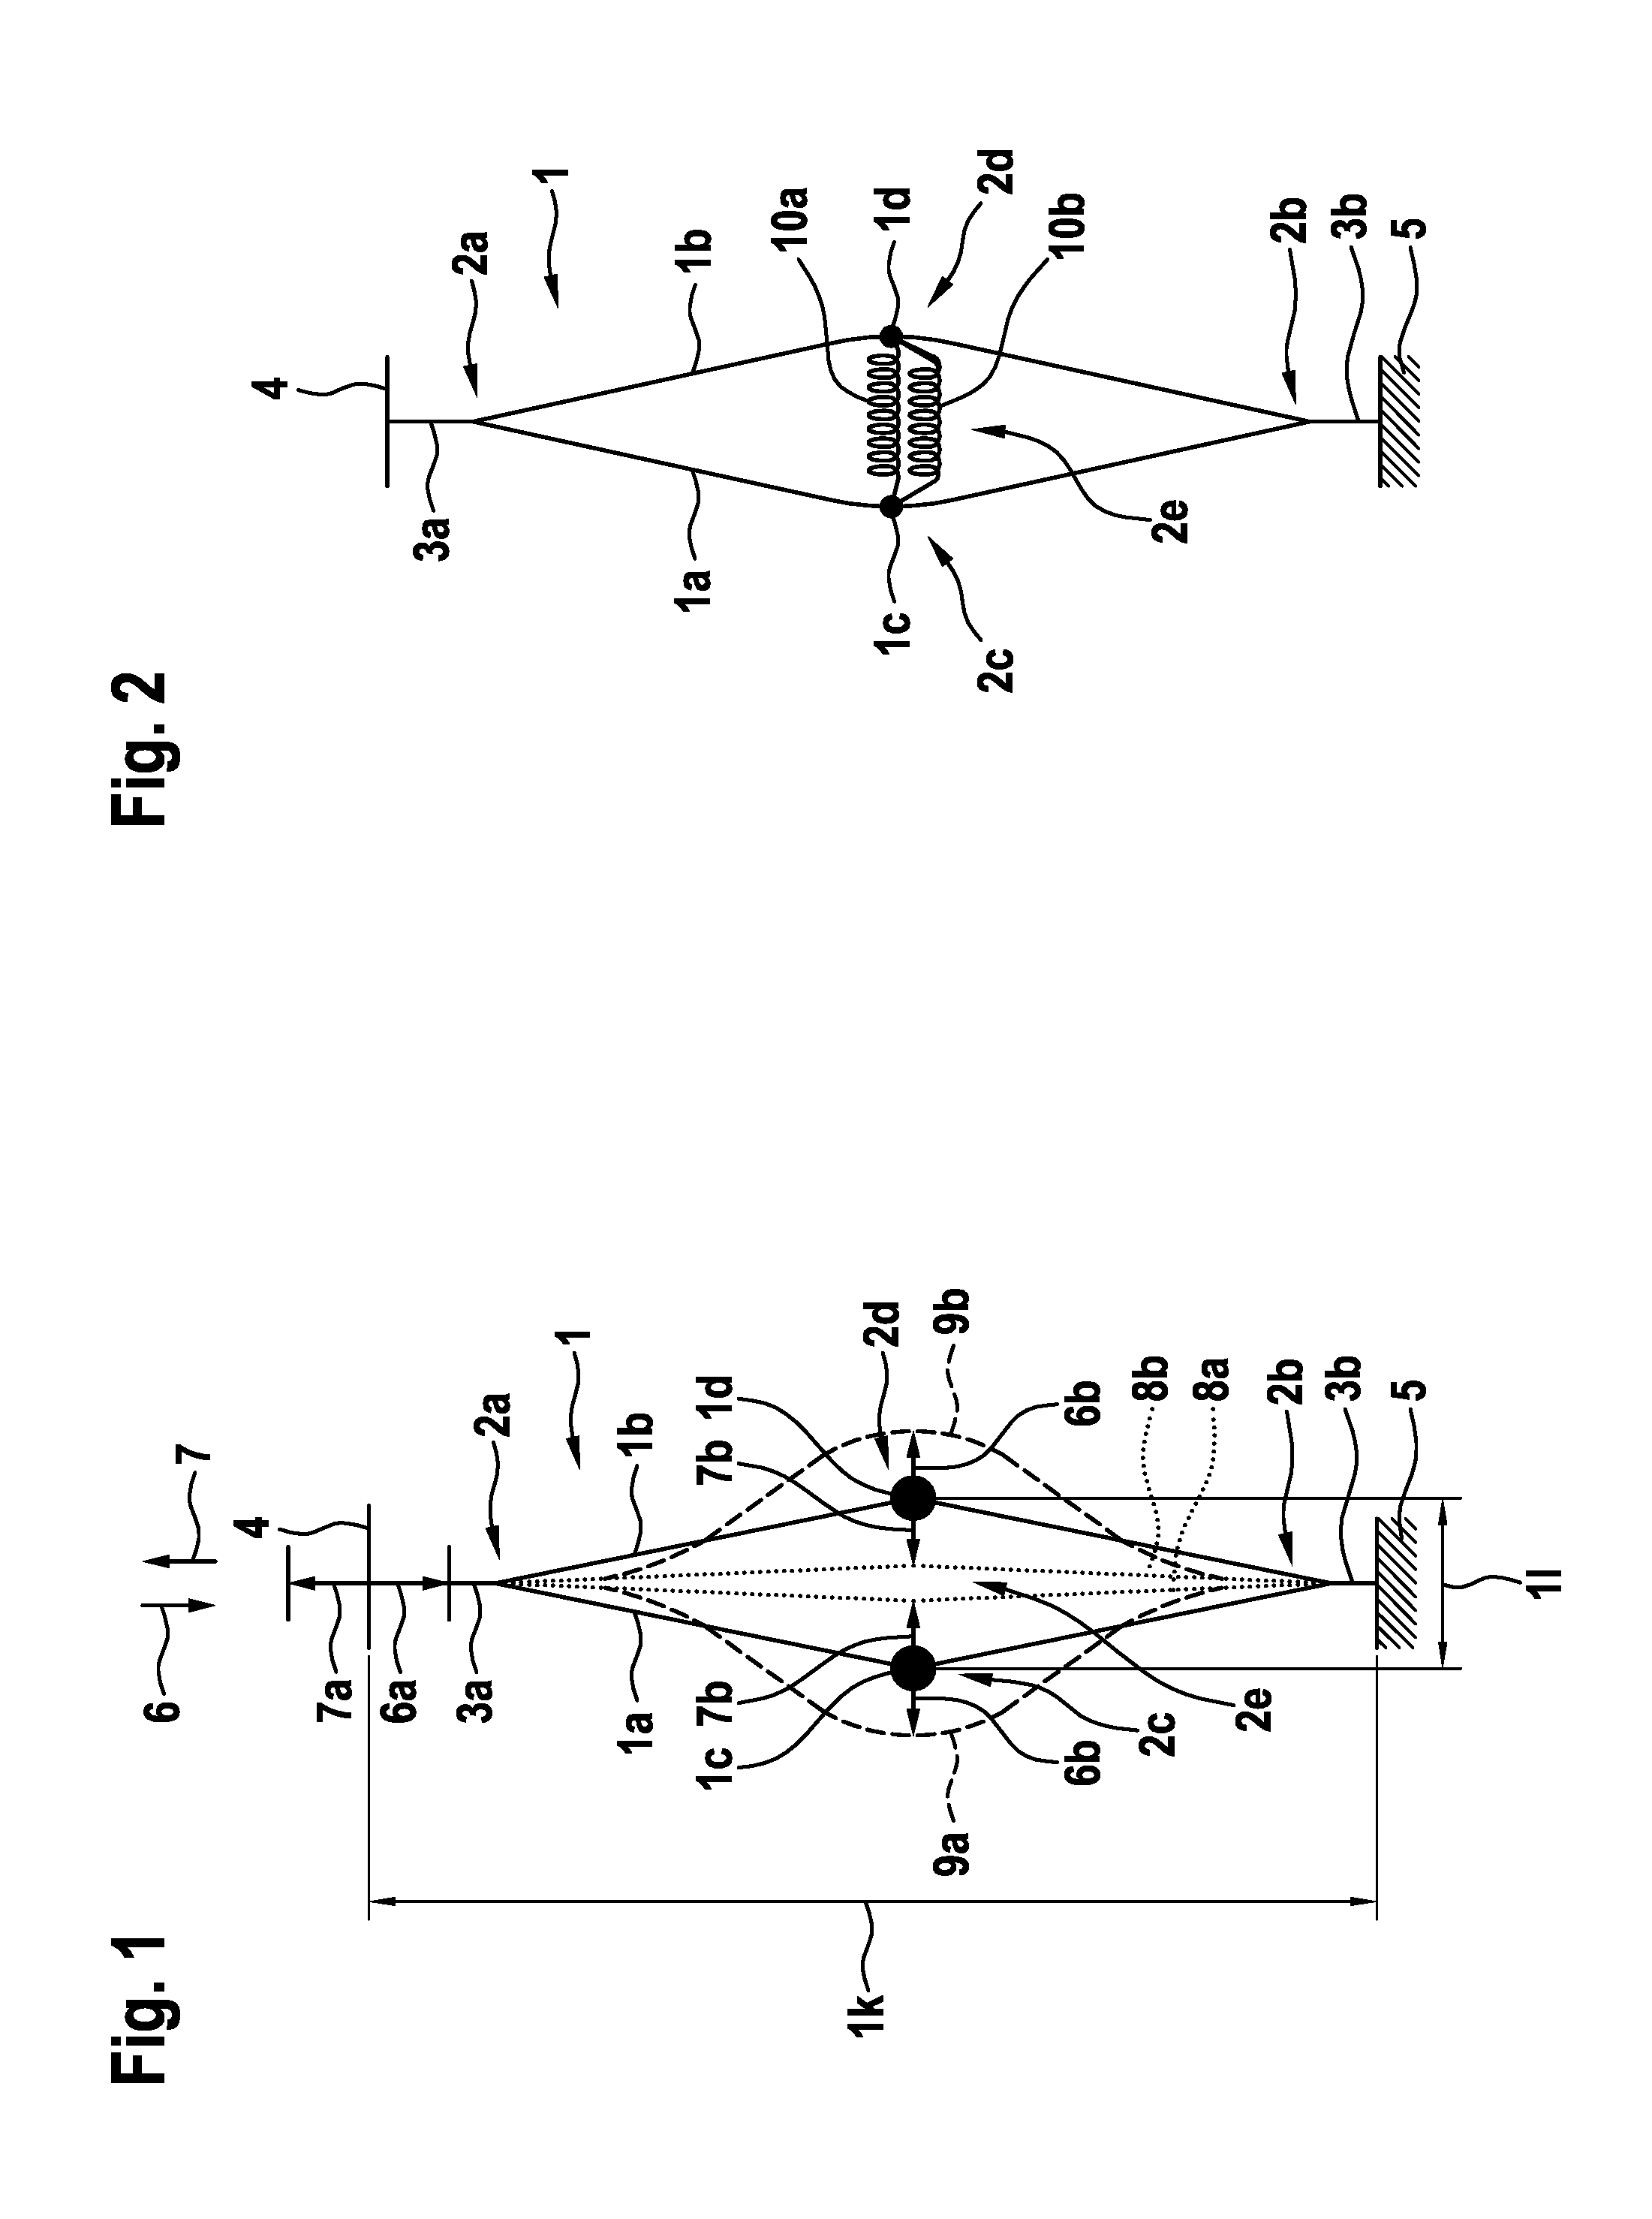 Vibration isolating device for an elastic coupling of two components